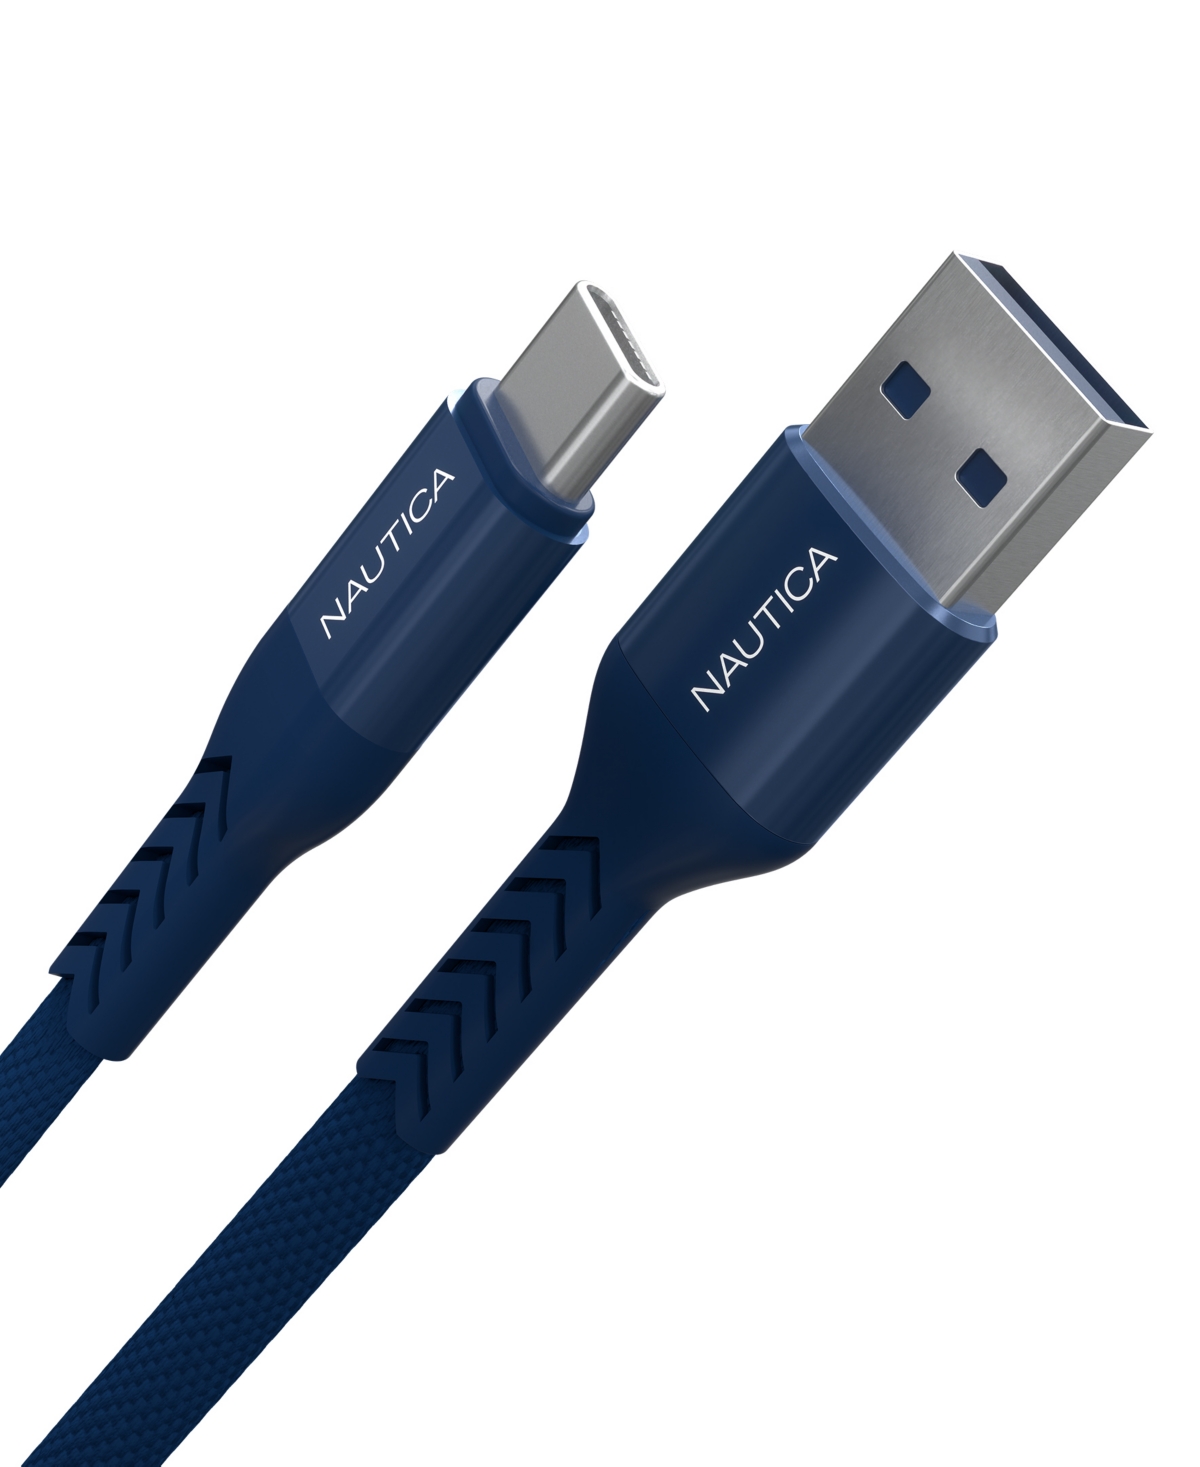 NAUTICA C20 USB-C TO USB-A CABLE, 4'